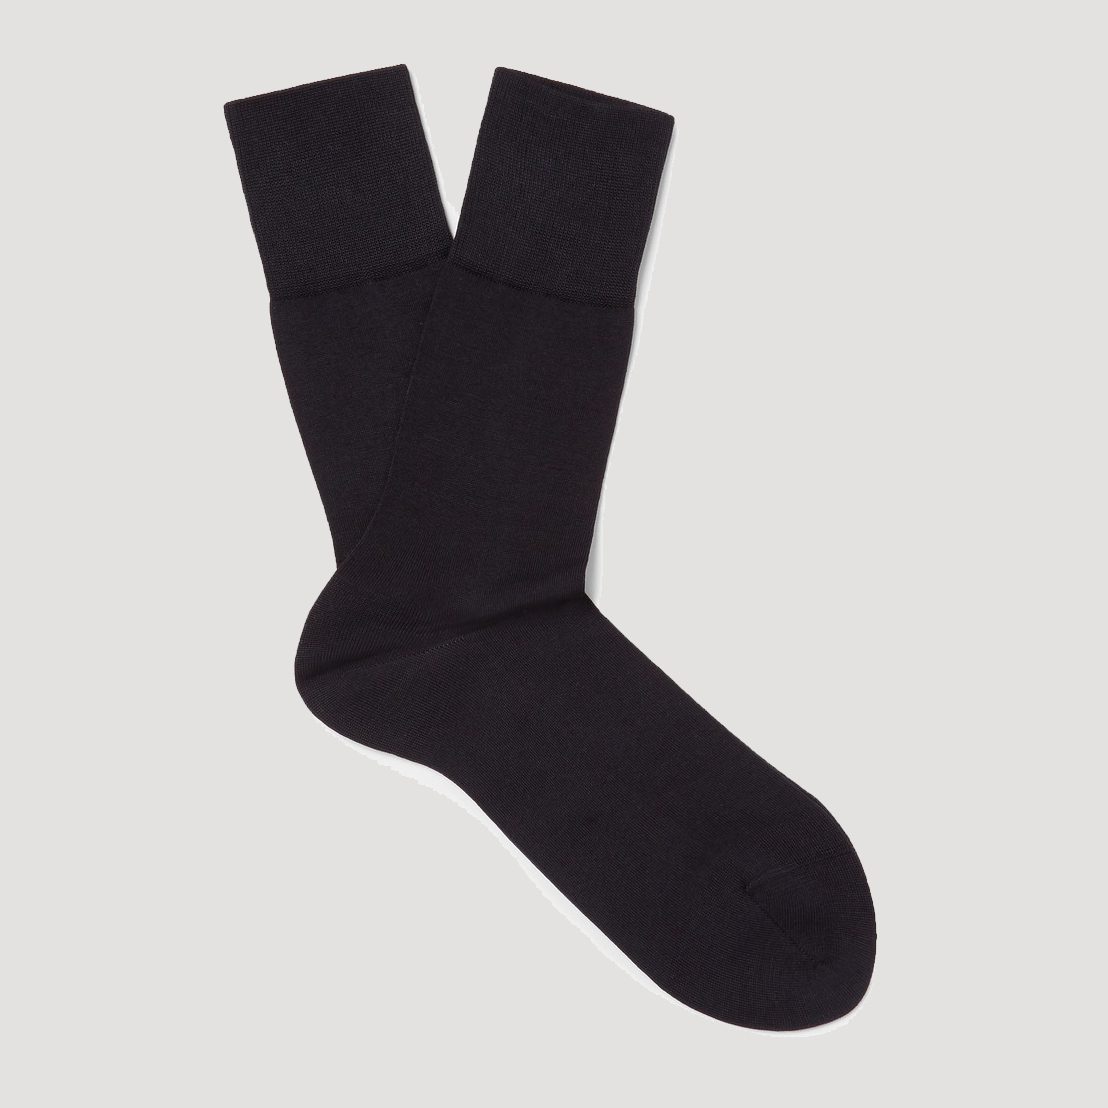 Five rules every man should know about wearing socks - The Standard  Evewoman Magazine